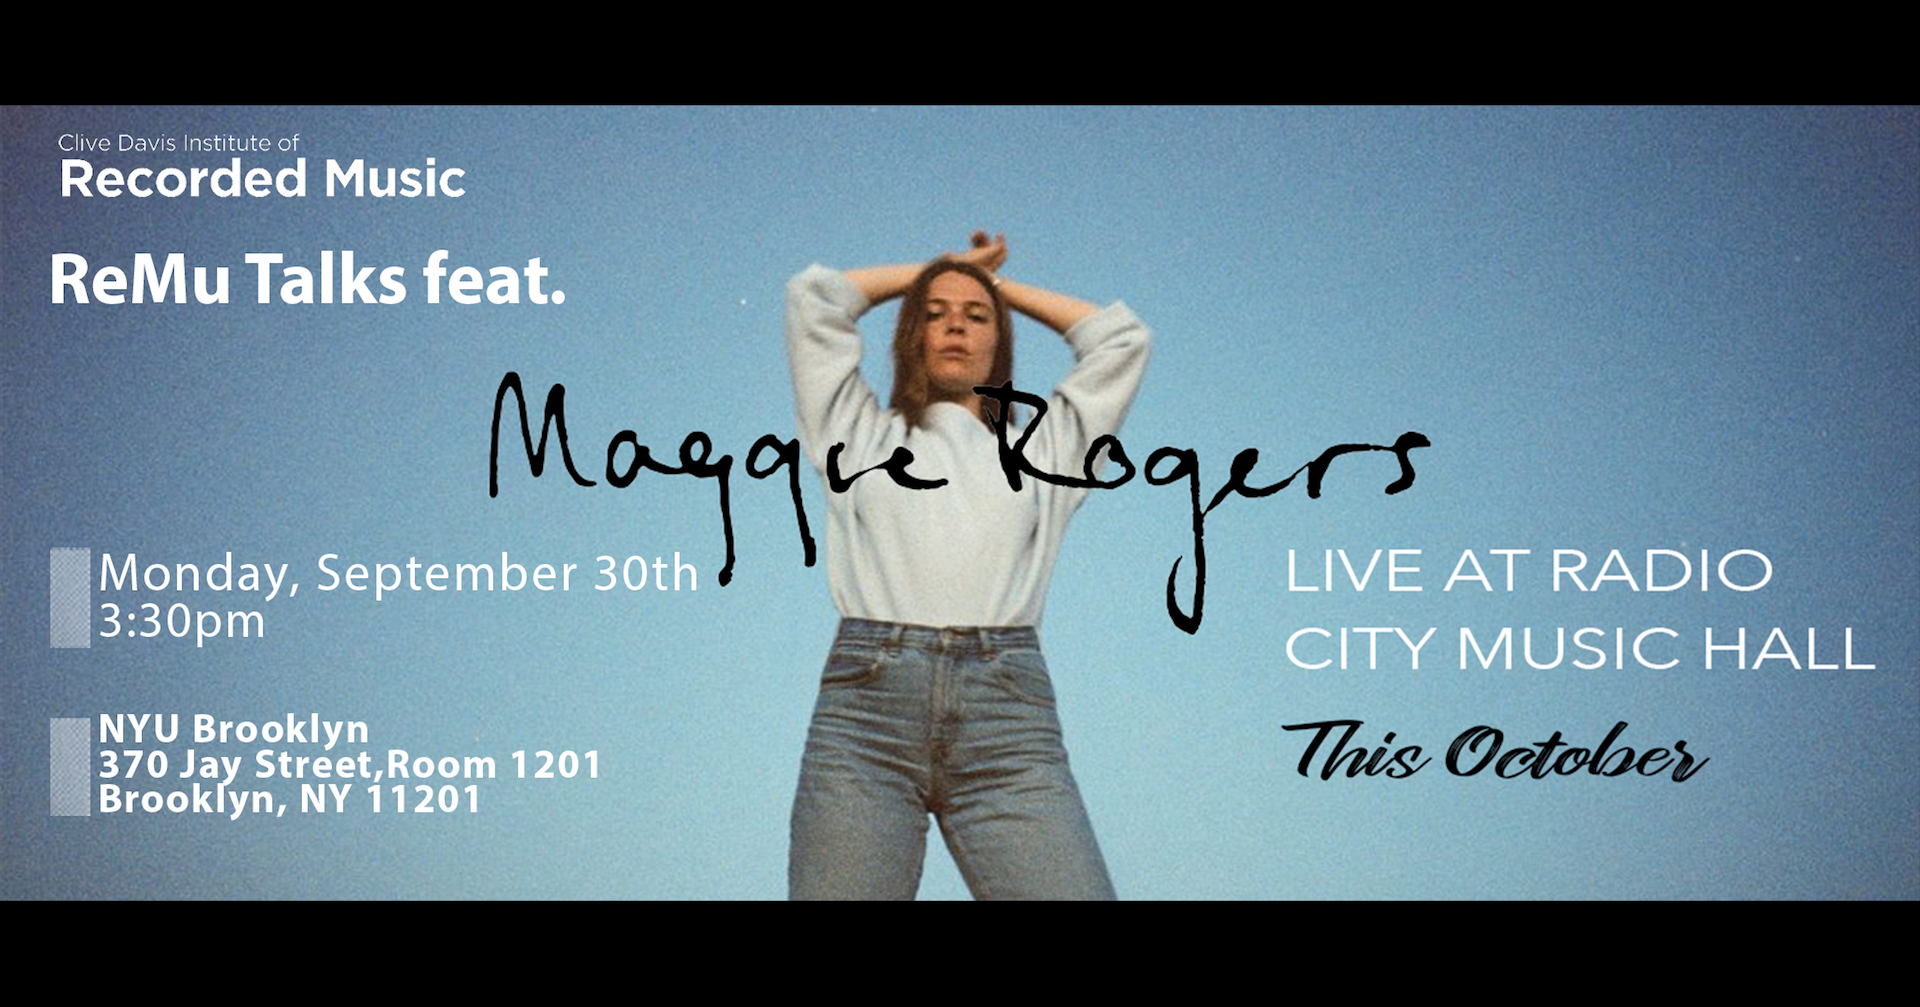 Flyer for ReMu Talks  Maggie Rogers event on 9/30/19